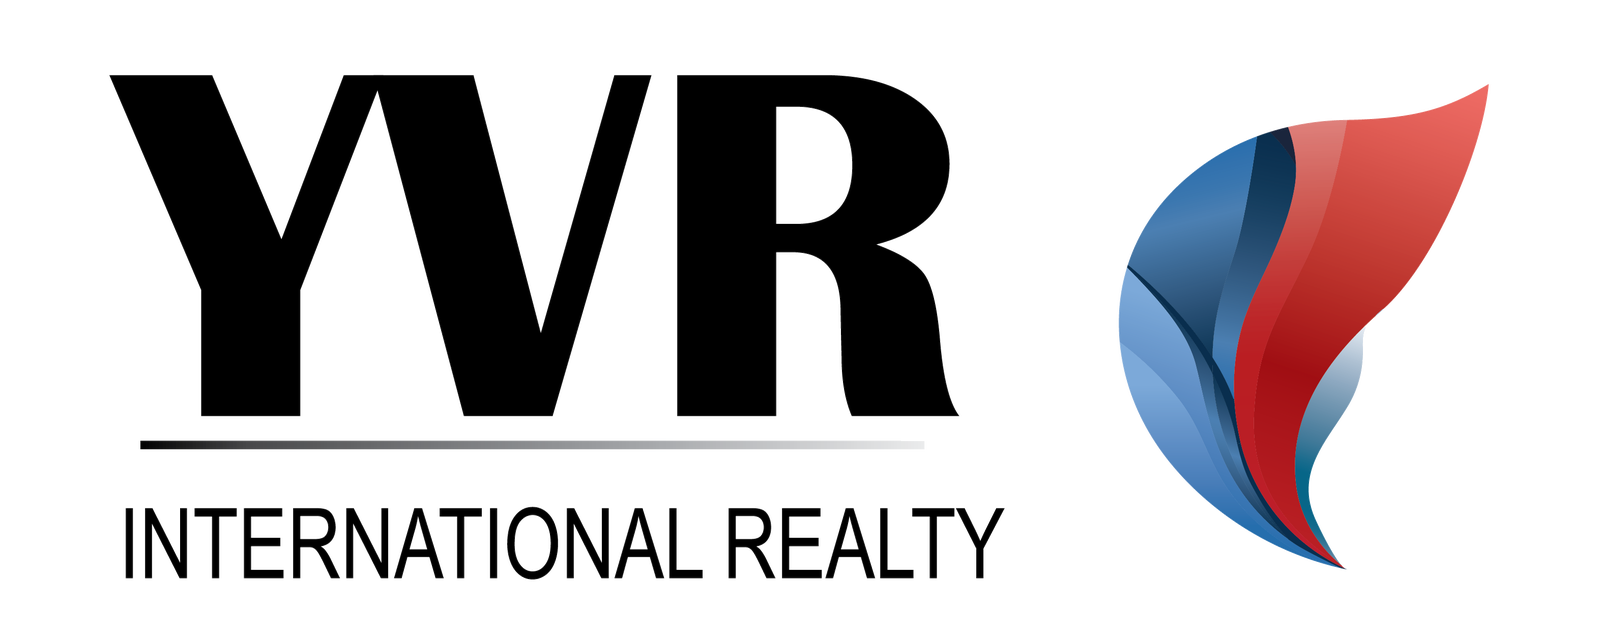 YVR International Realty - Your Vancouver Realtors for Property ...